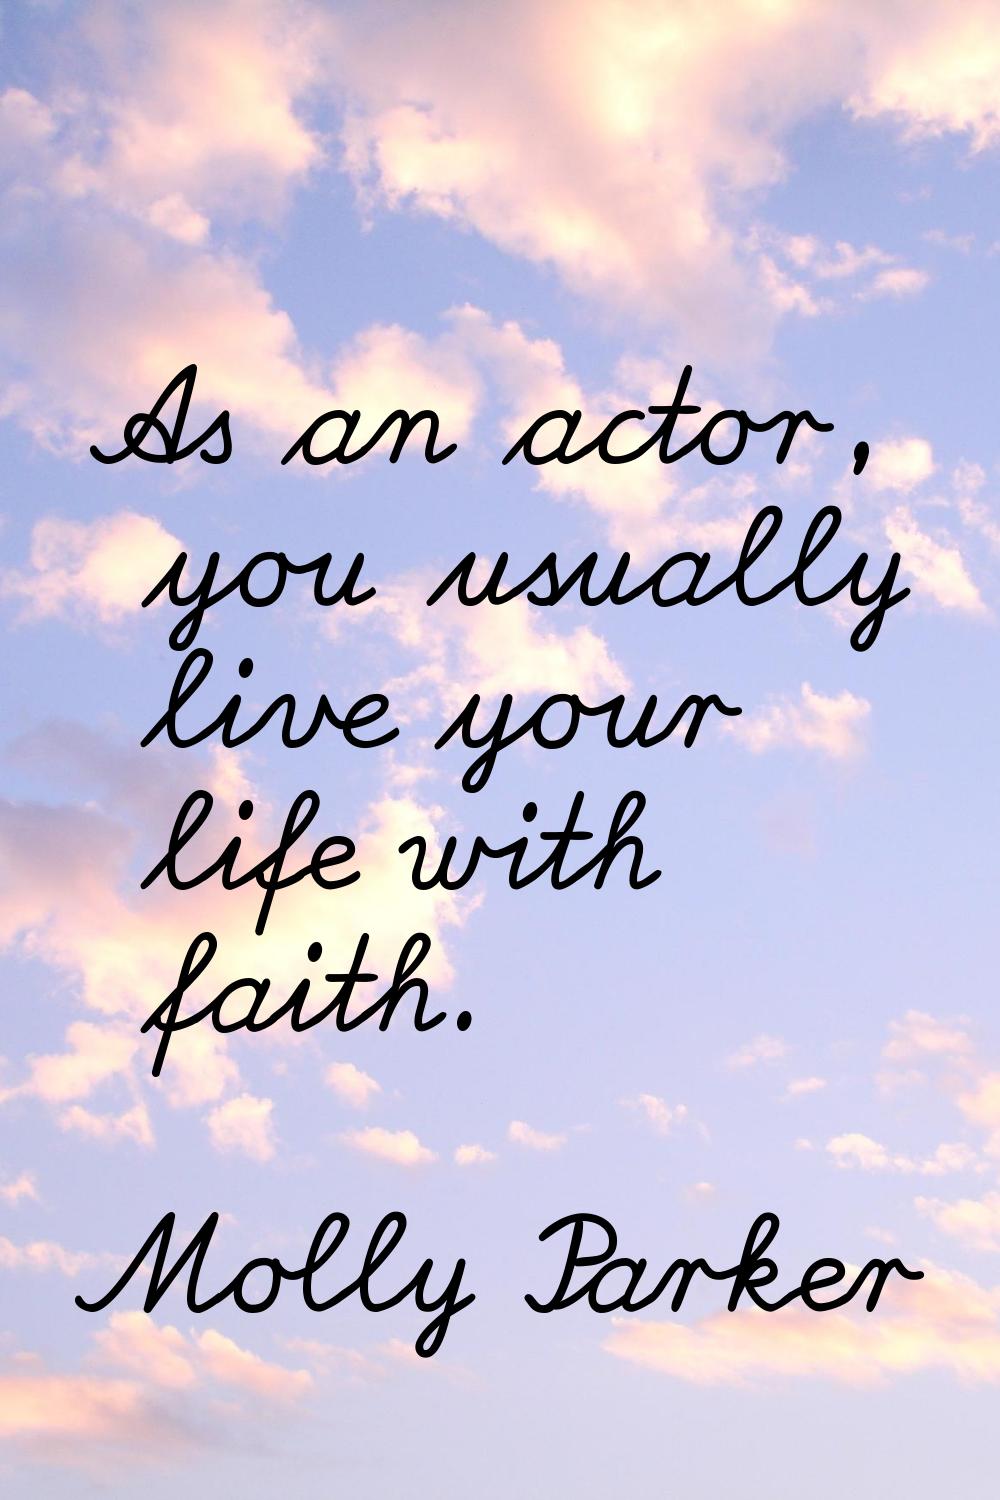 As an actor, you usually live your life with faith.